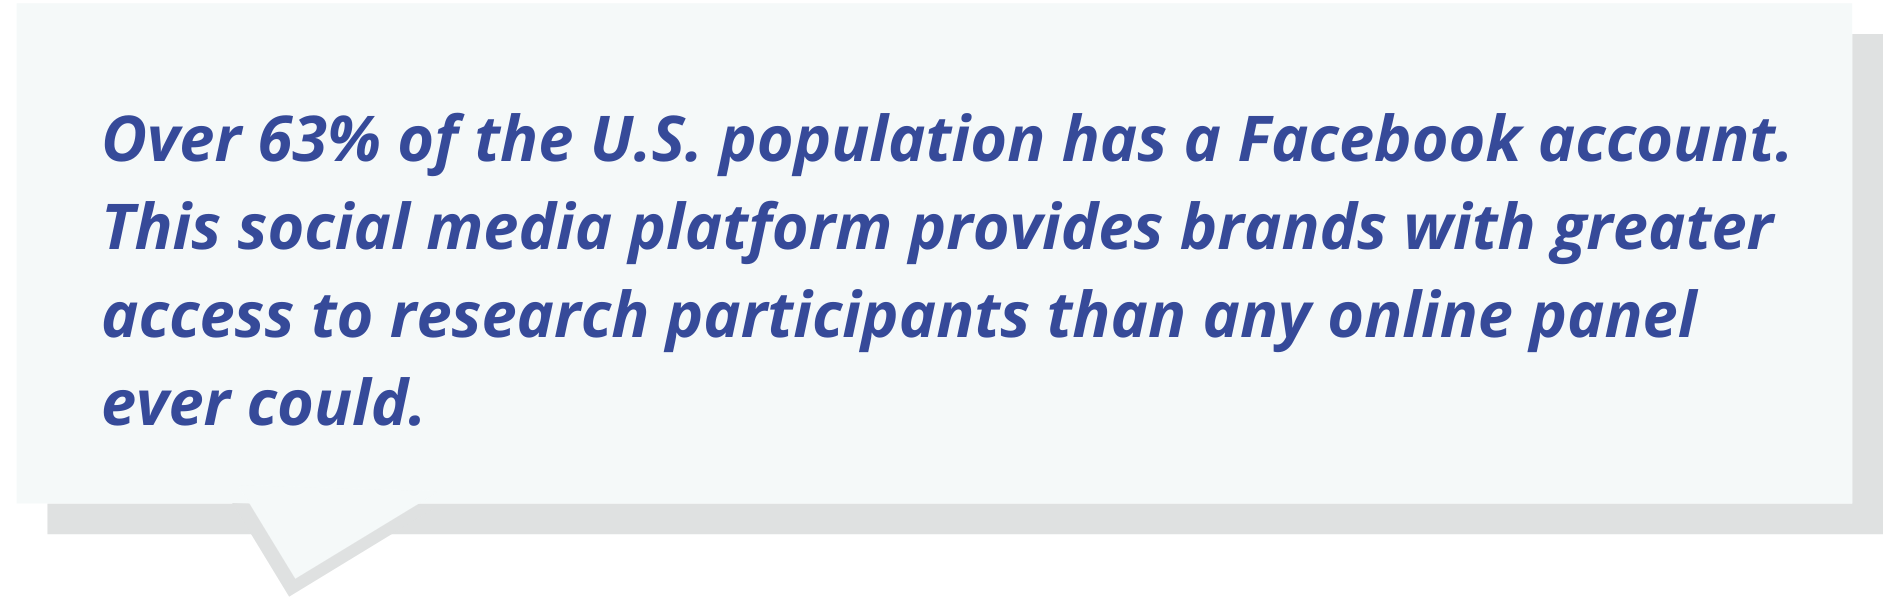 Over 63% of the U.S. population has a Facebook account. This social media platform provides brands with greater access to research participants than any online panel ever could.